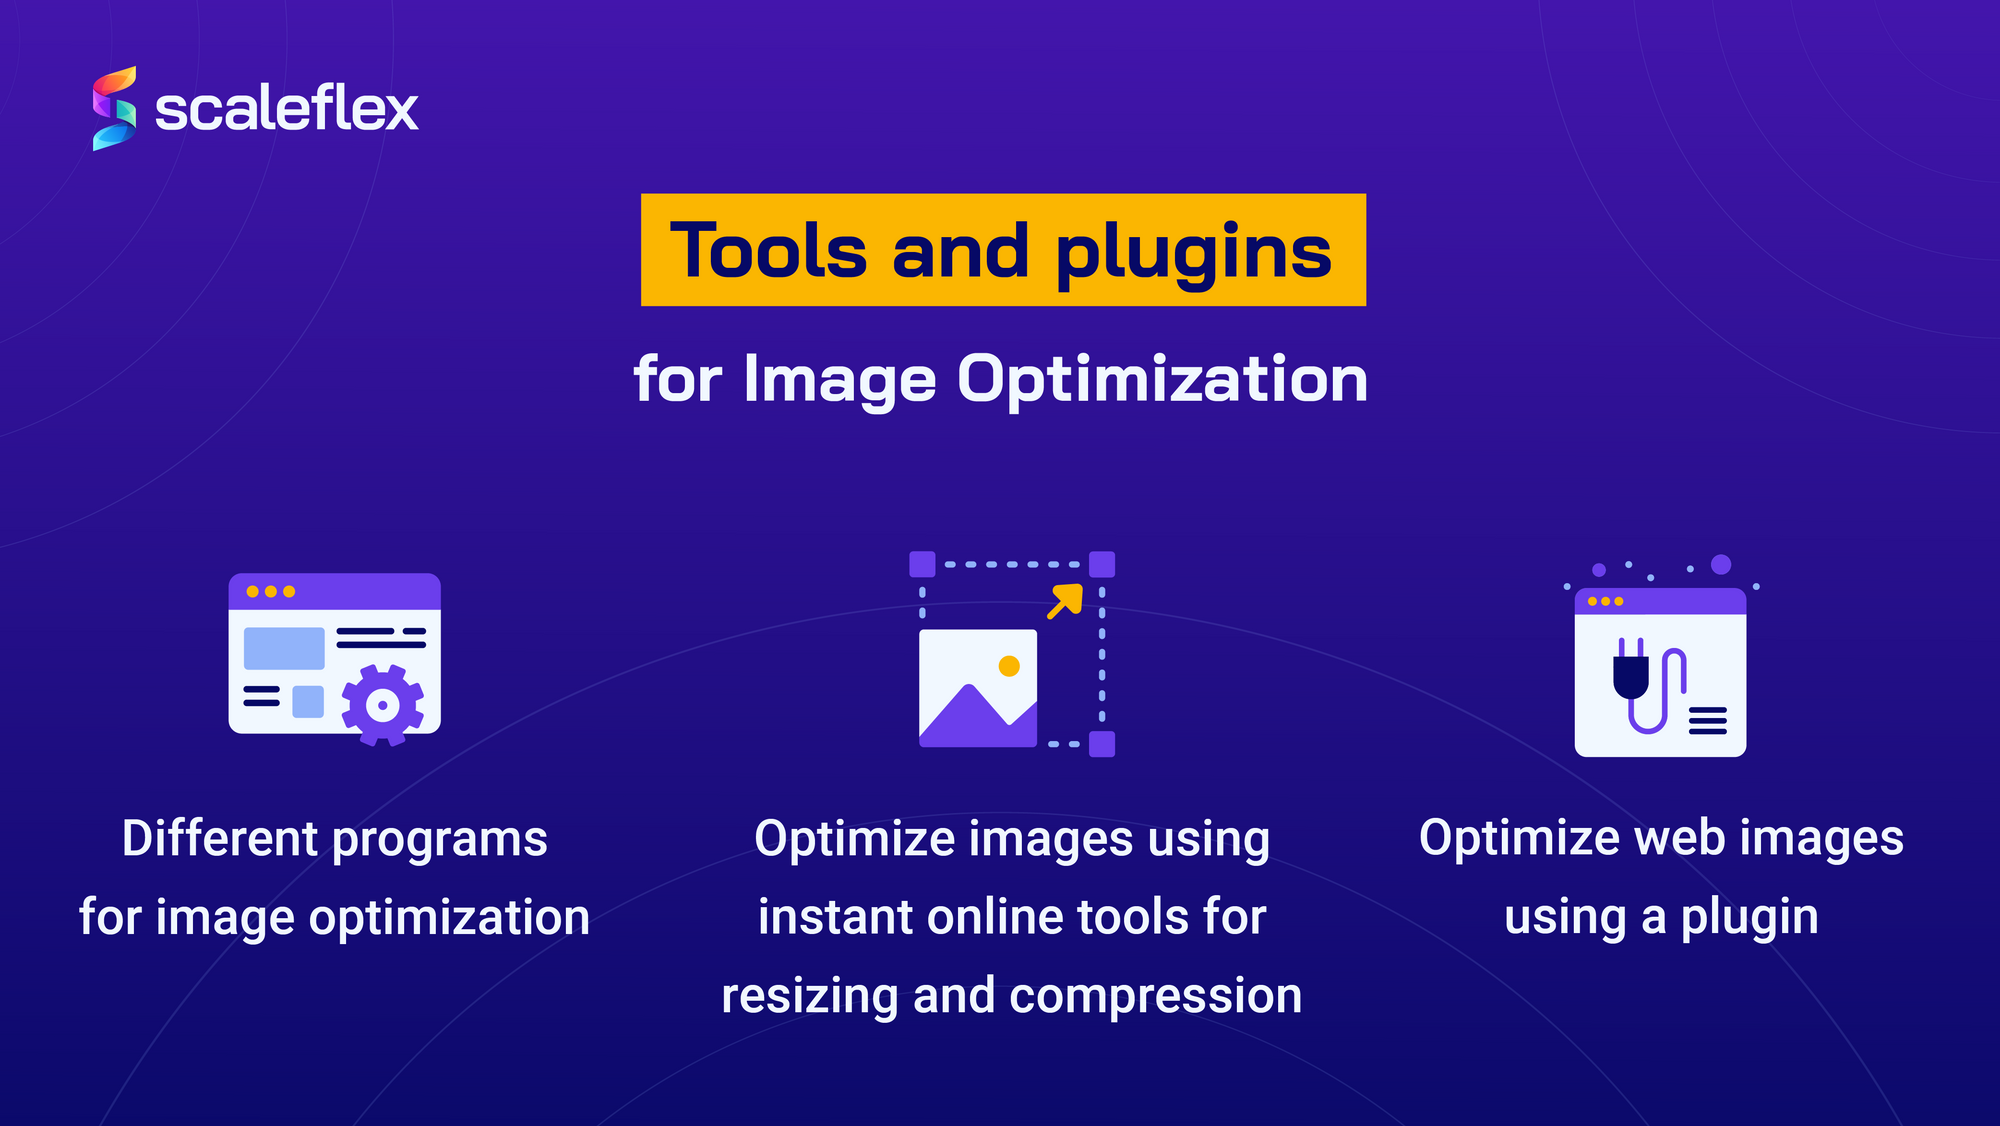 The most 03 popular options to go for when performing image optimization